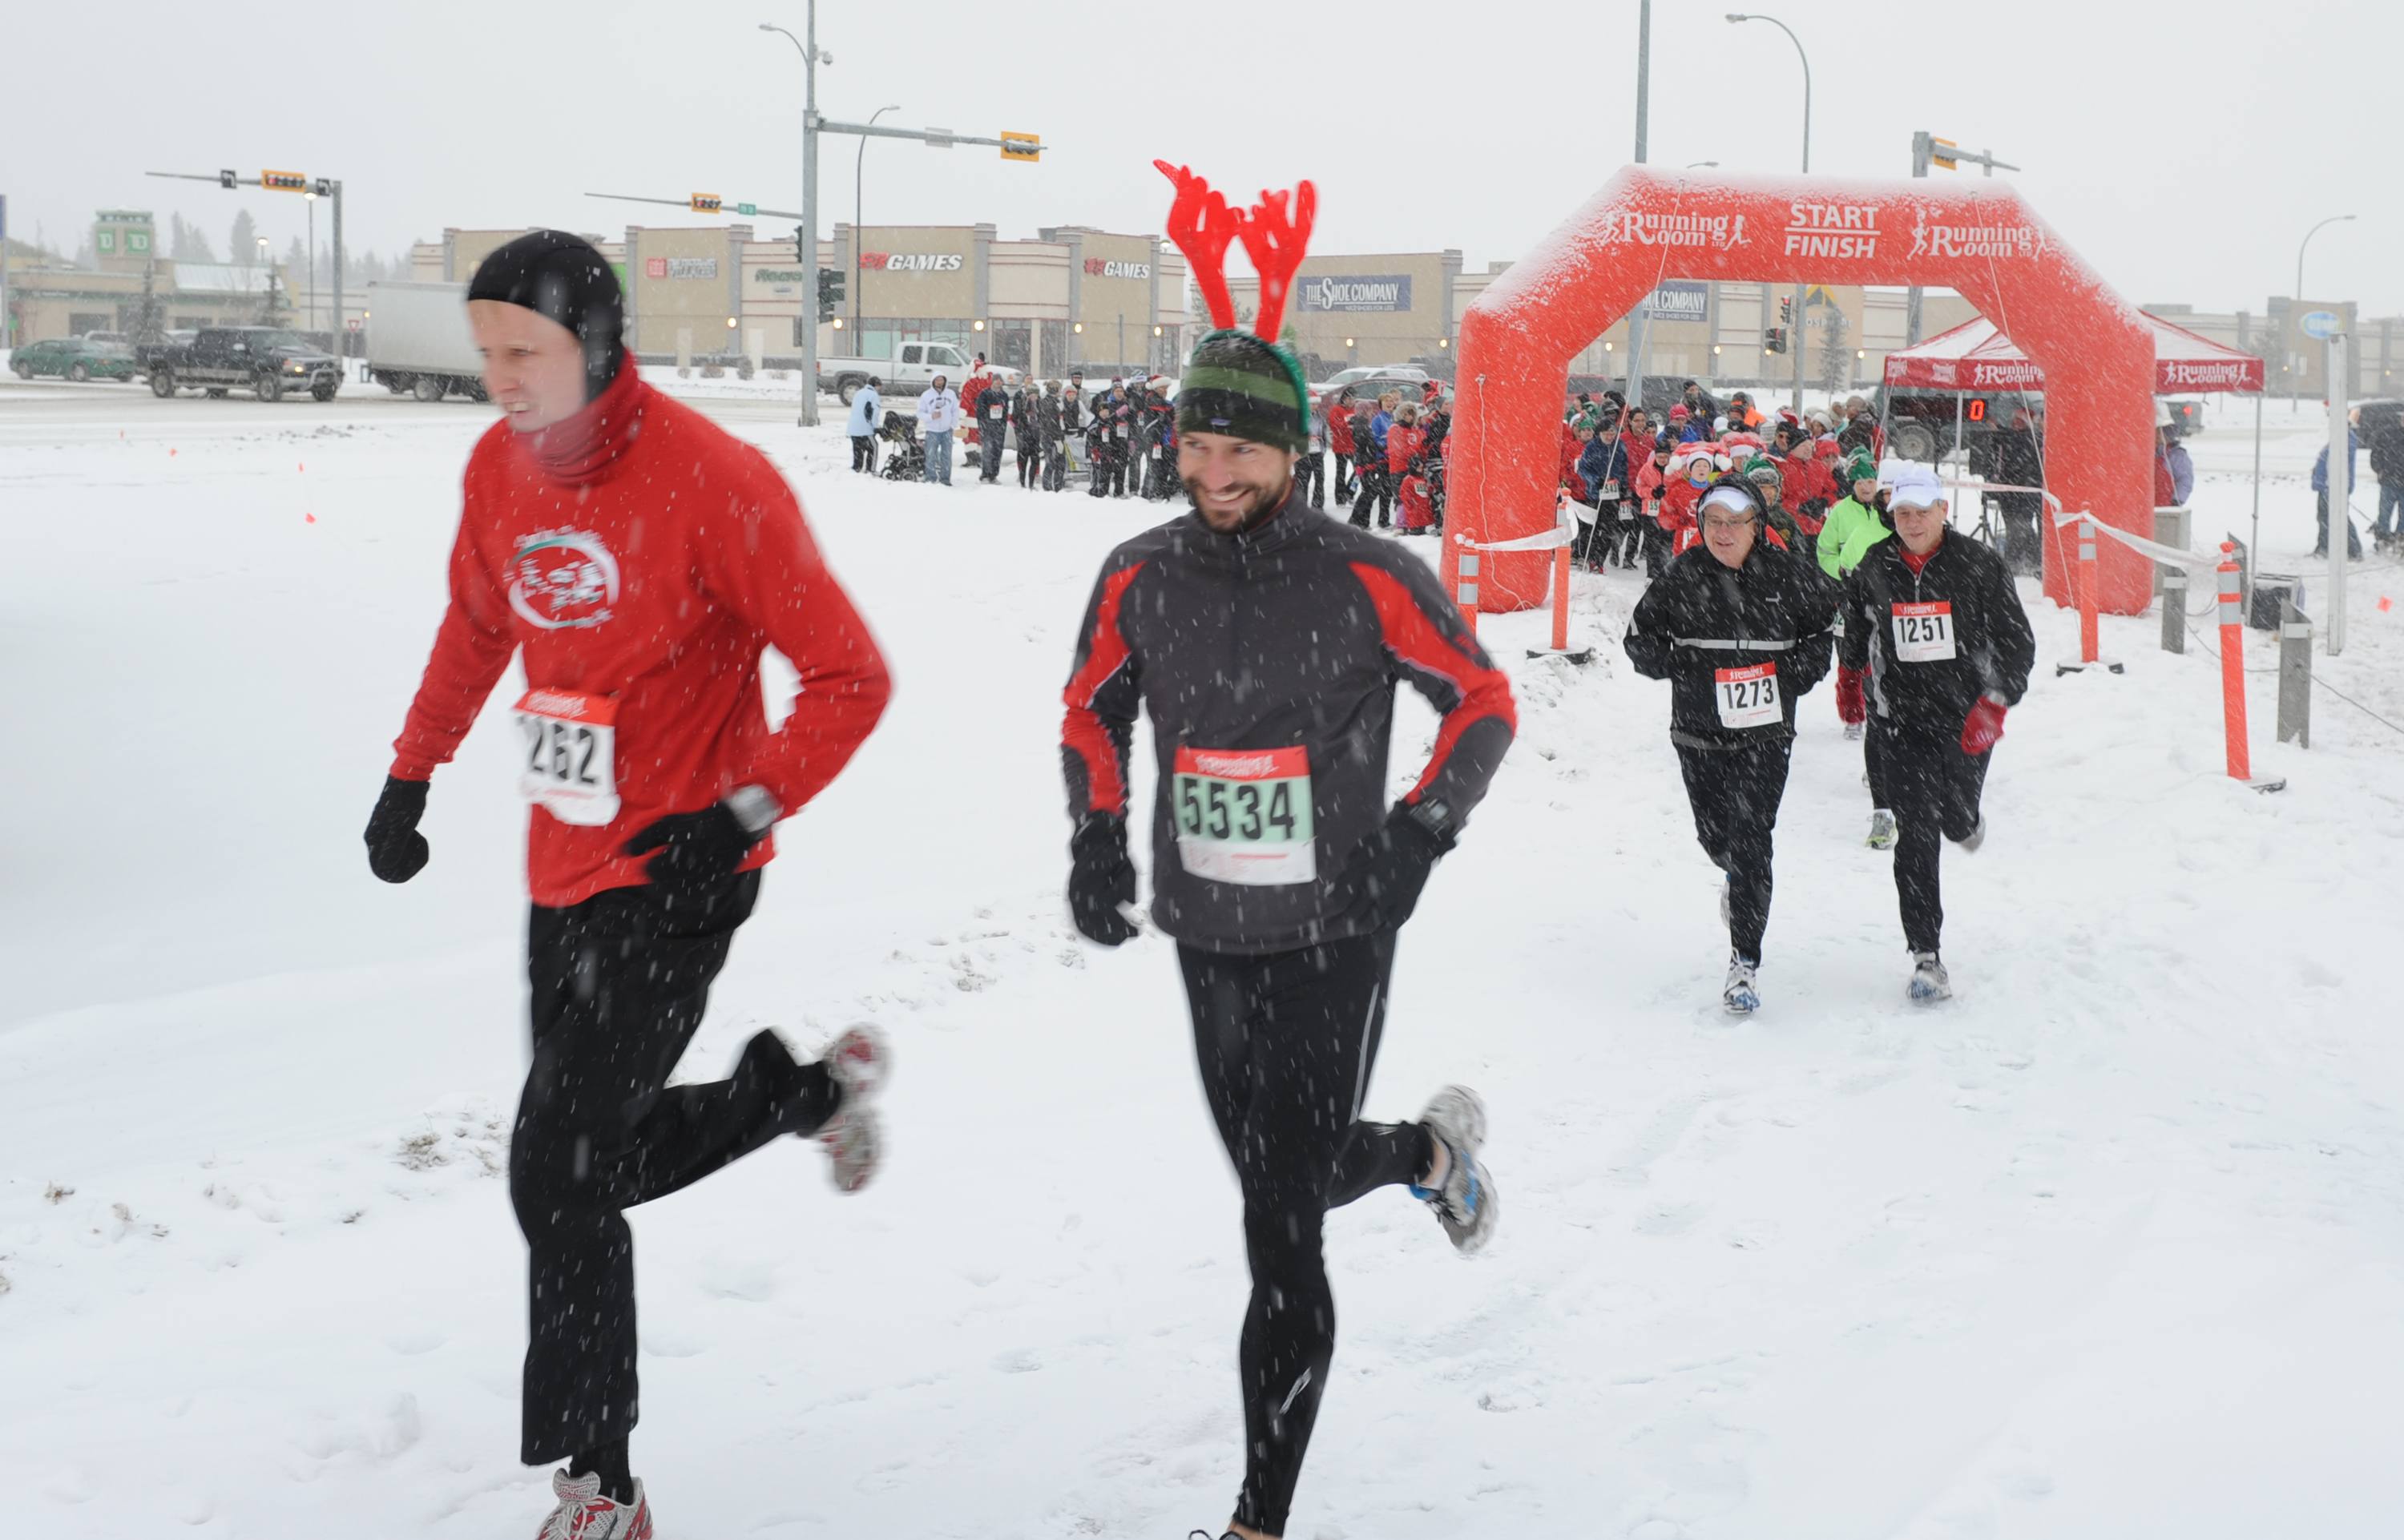 SHUFFLING- The Annual Santa Shuffle was a success this past weekend with lots of people participating and enjoying the snowy day.